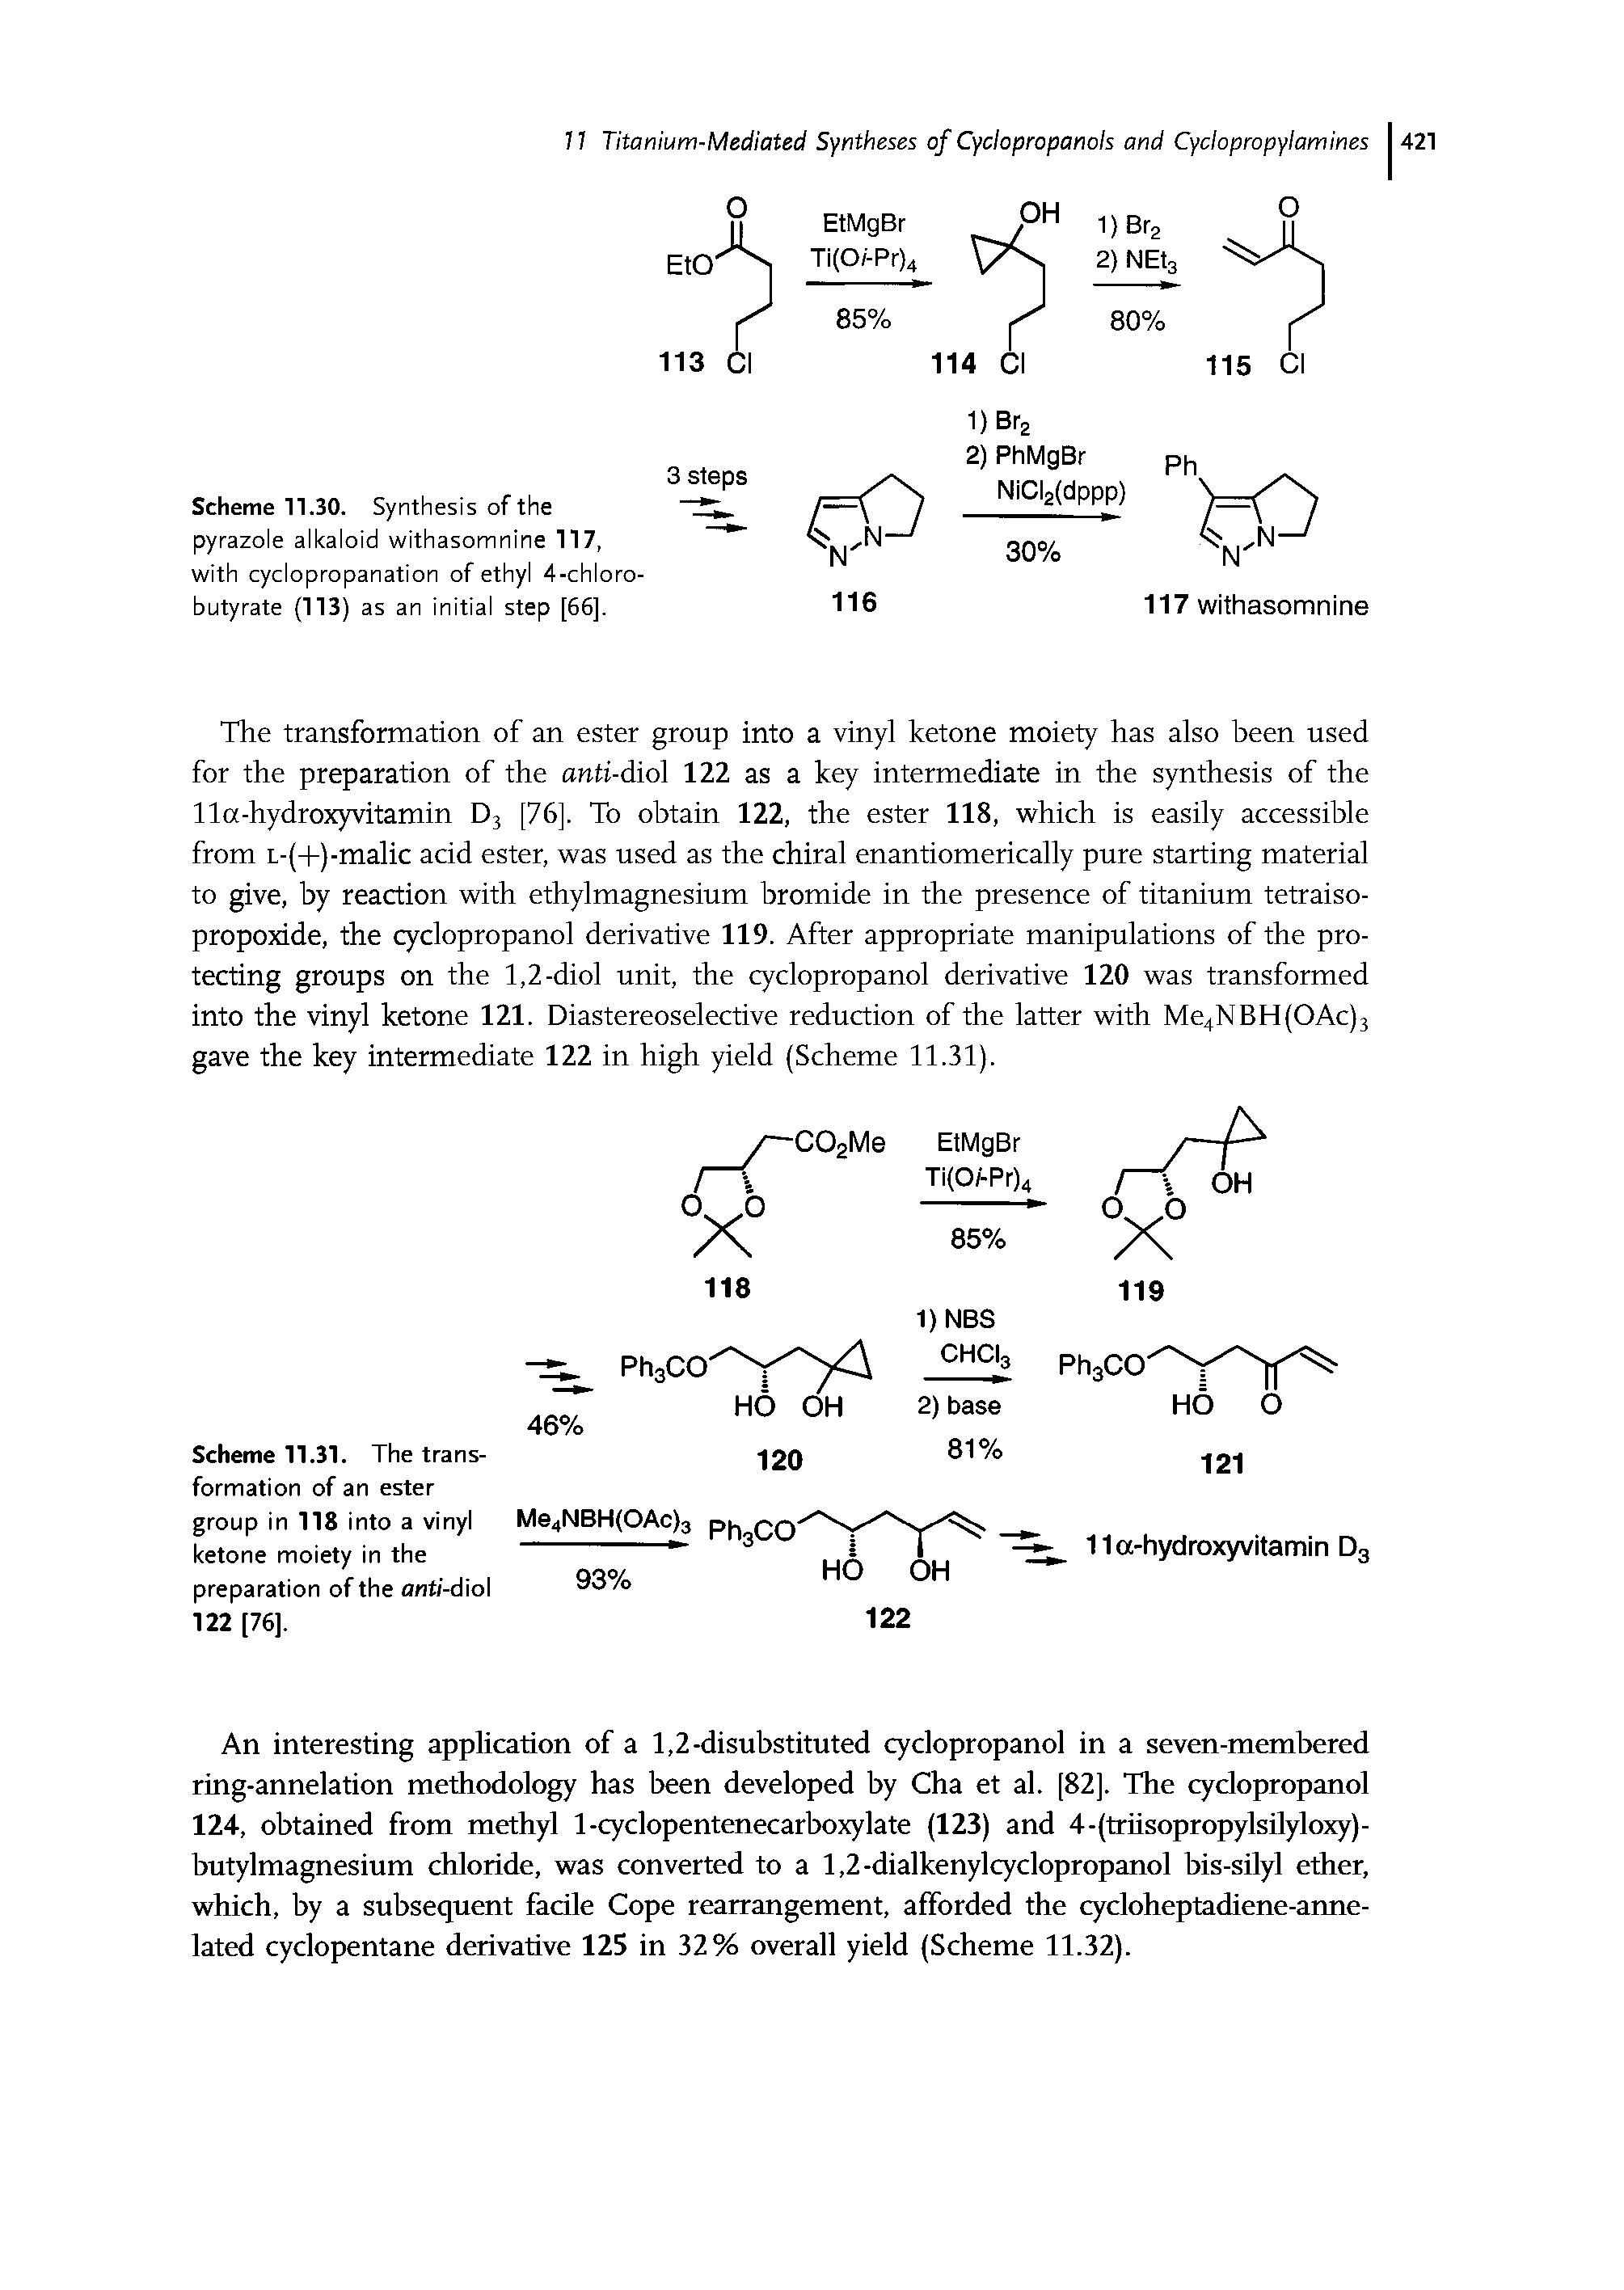 Scheme 11.30. Synthesis of the pyrazole alkaloid withasomnine 117, with cyclopropanation of ethyl 4-chloro-butyrate (113) as an initial step [66],...